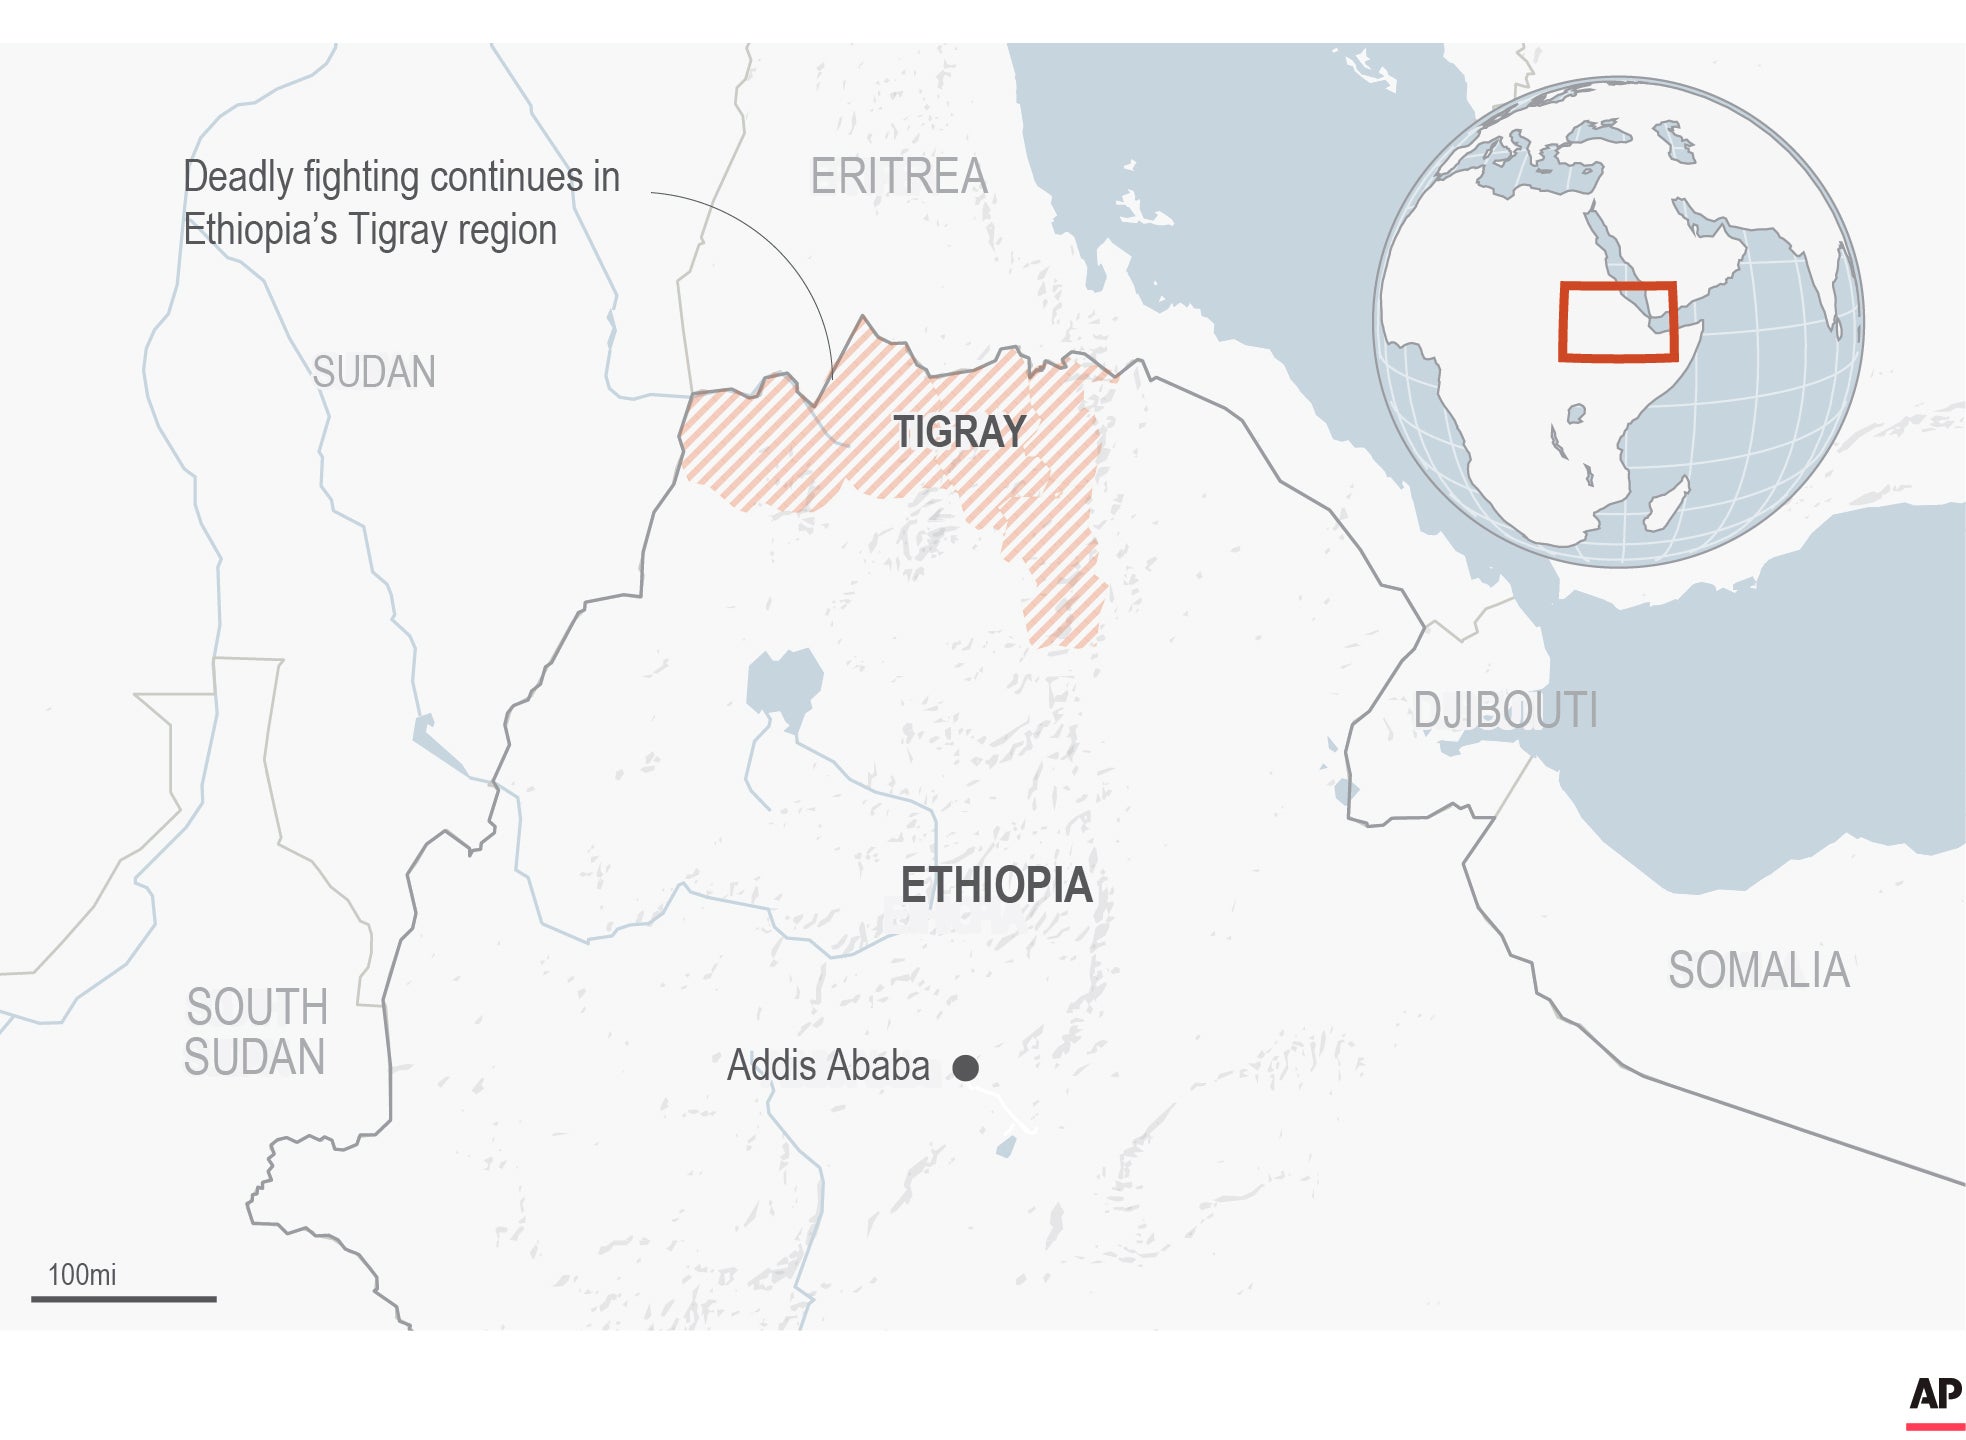 Tigray is located in the north of Ethiopia and borders Sudan